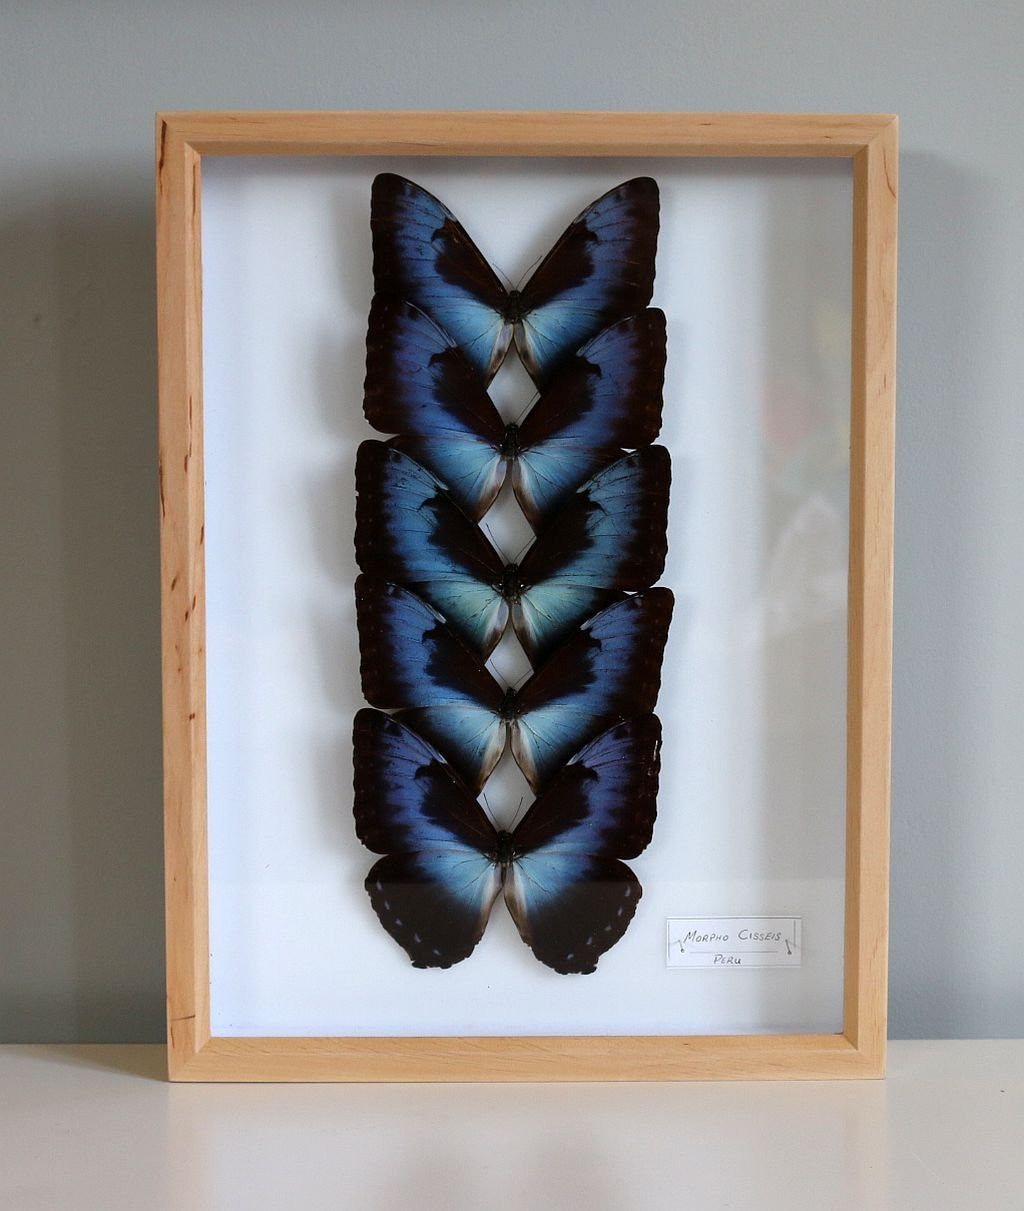 How To Display Framed Butterflies and Moths At Home